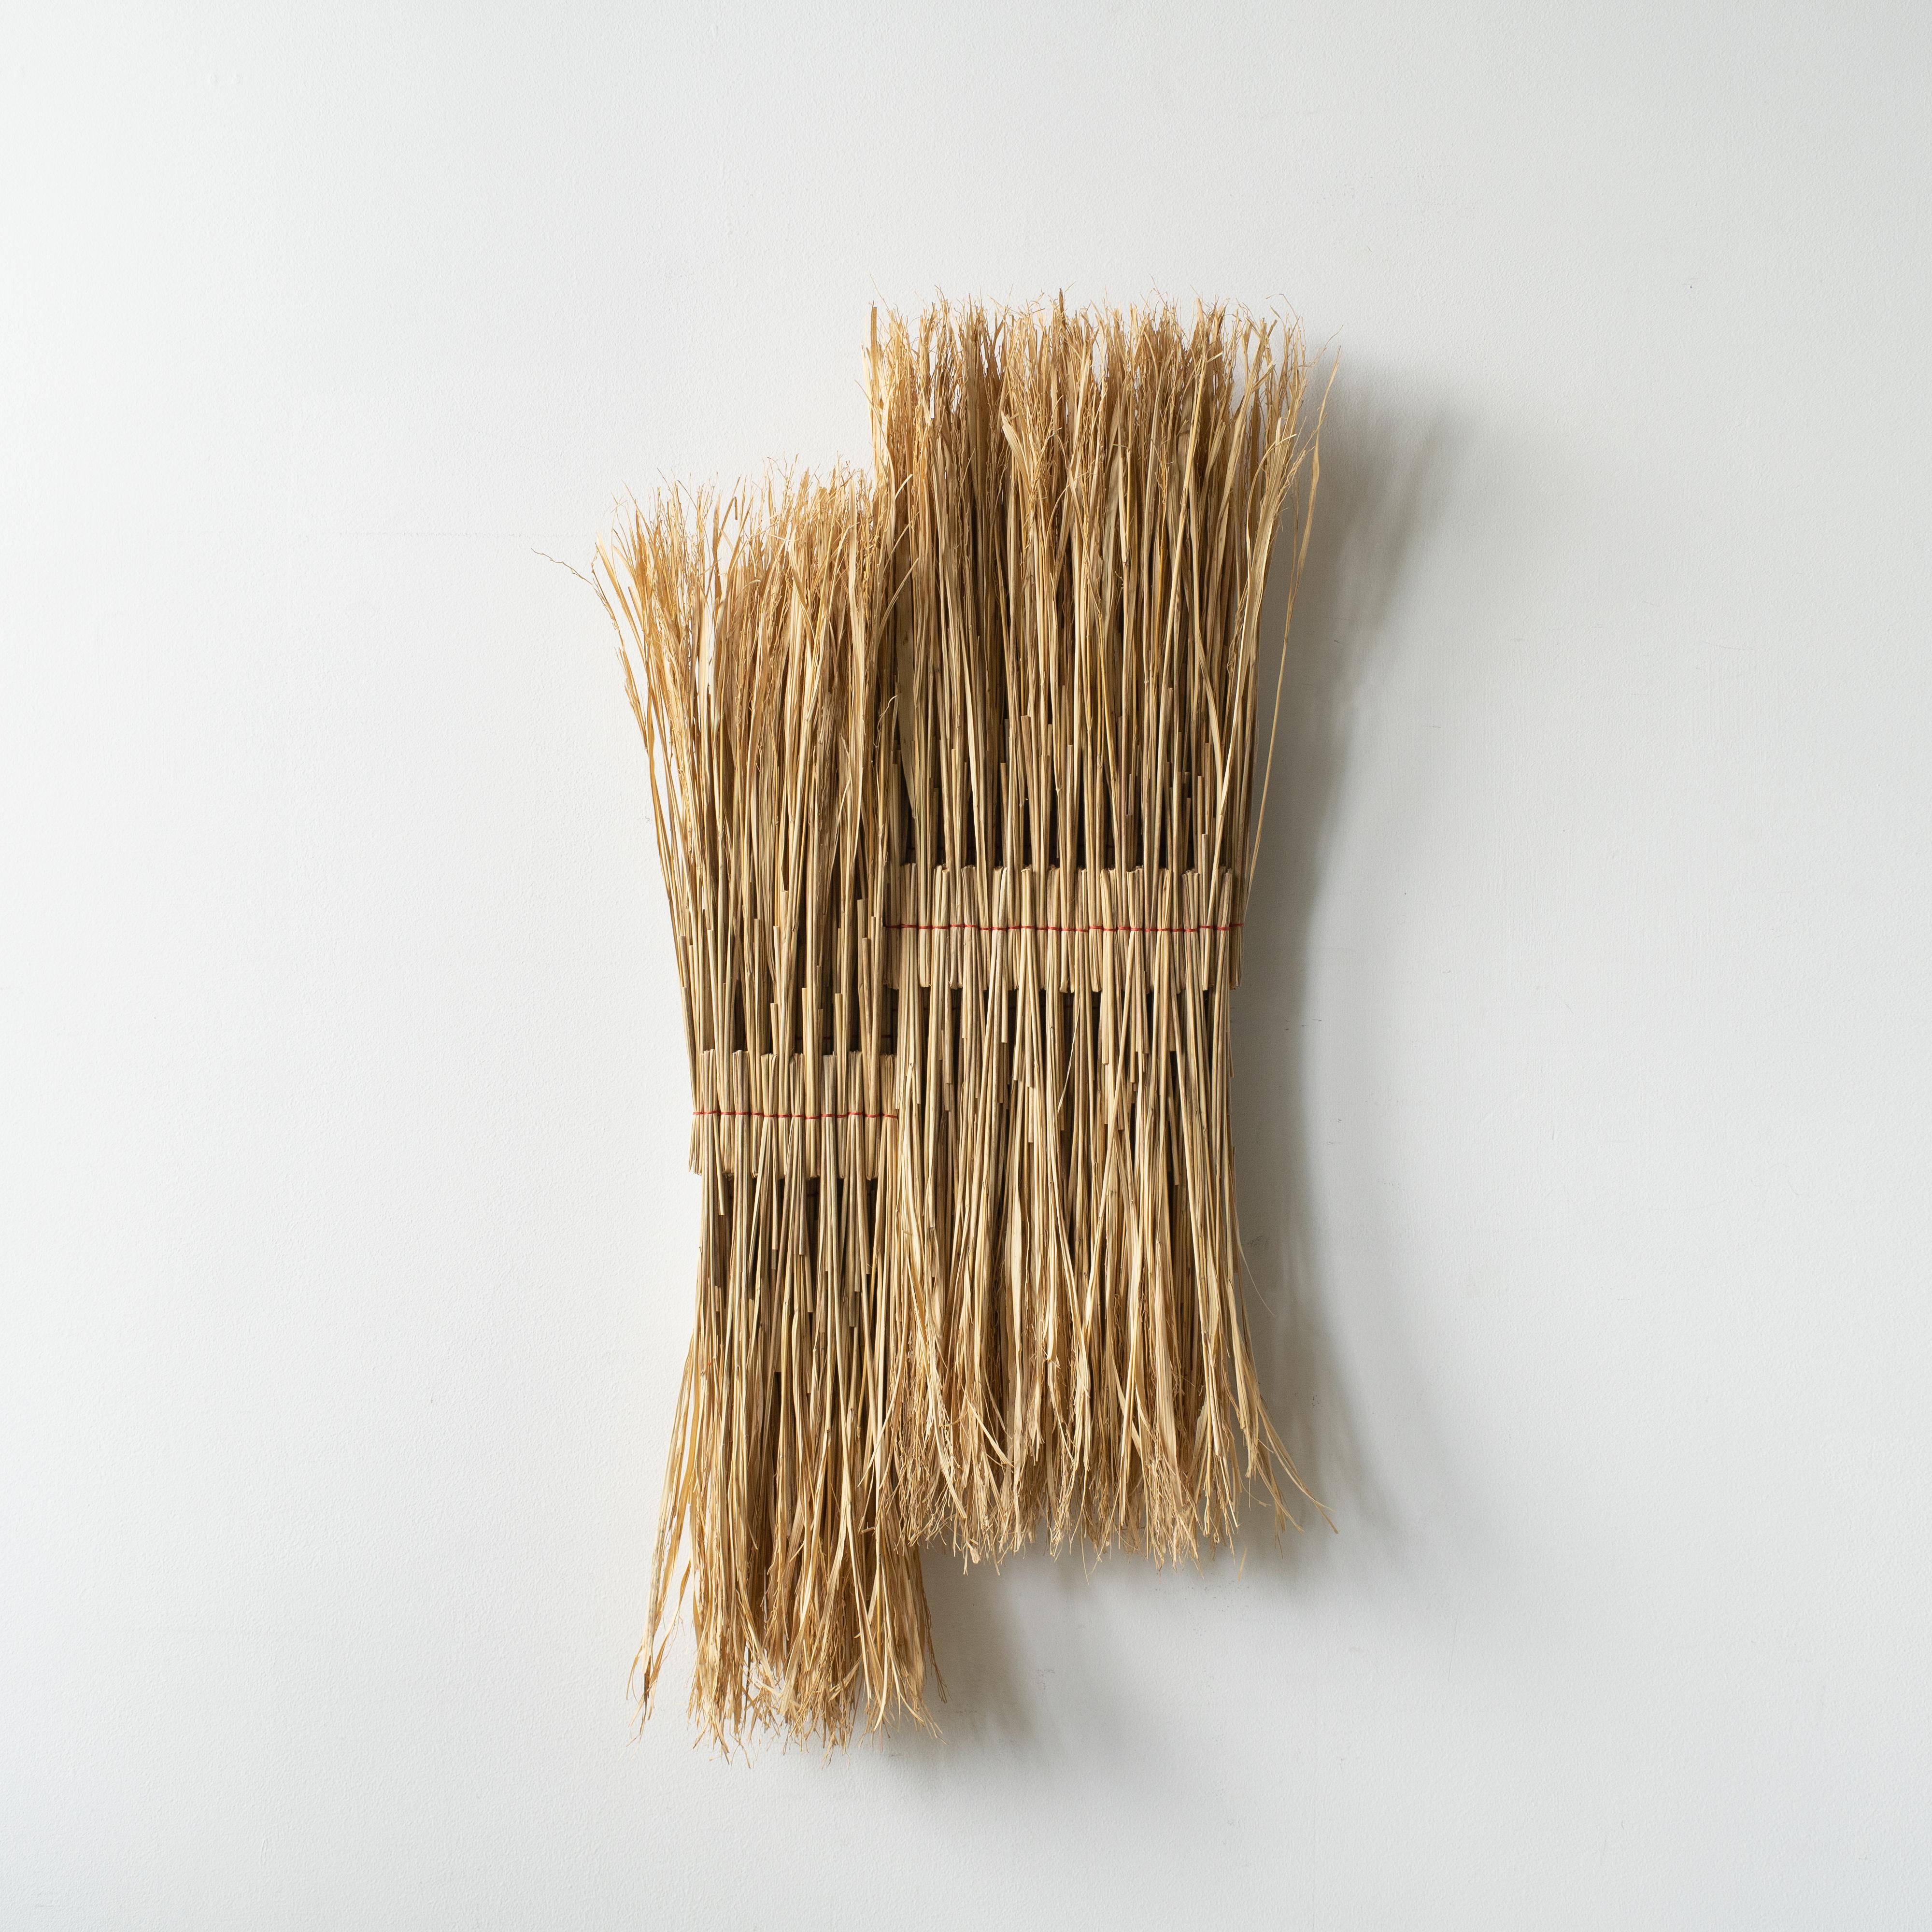 Hand-sewed rice straw art by ARKO. 
Title: Composition Marcato (B)
This is one of the series named 